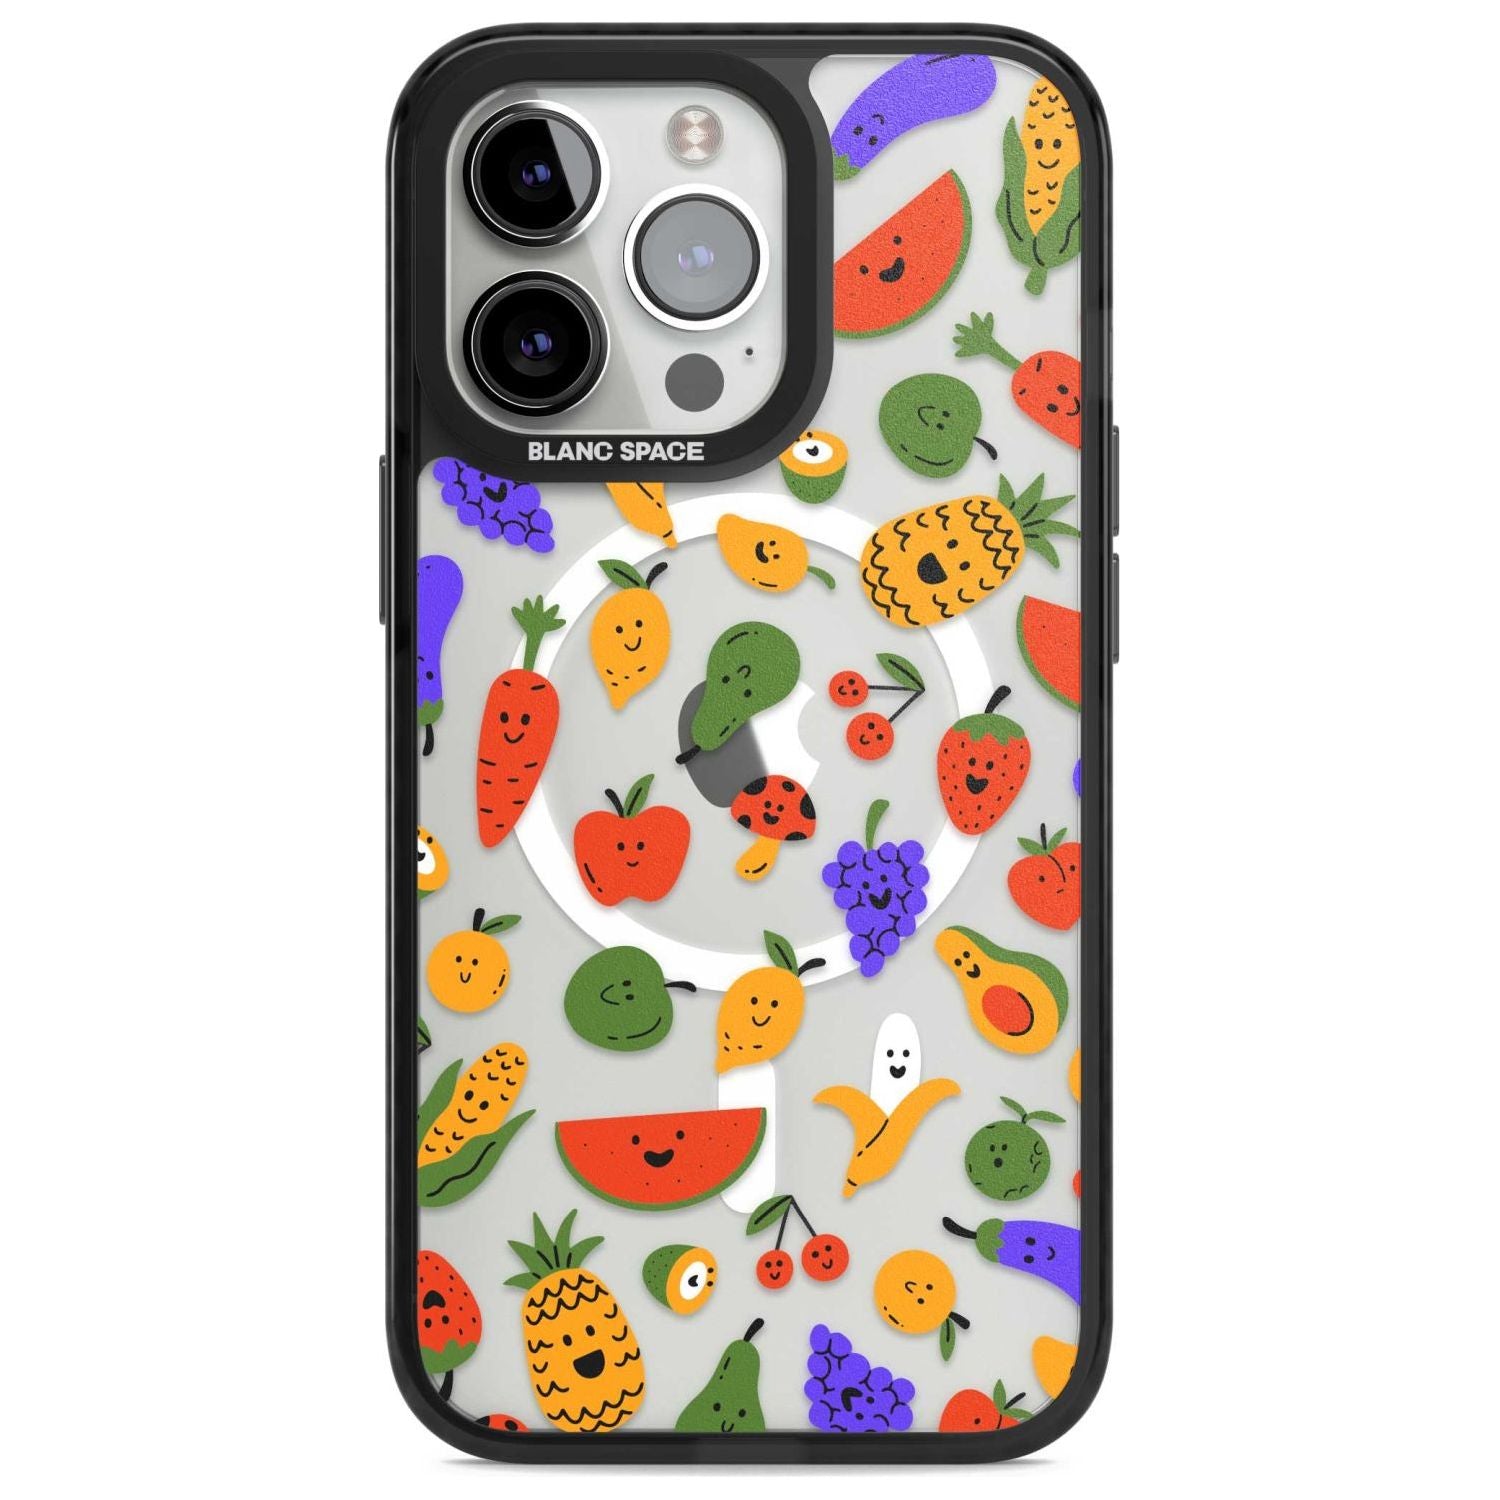 Mixed Kawaii Food Icons - Clear Phone Case iPhone 15 Pro Max / Magsafe Black Impact Case,iPhone 15 Pro / Magsafe Black Impact Case,iPhone 14 Pro Max / Magsafe Black Impact Case,iPhone 14 Pro / Magsafe Black Impact Case,iPhone 13 Pro / Magsafe Black Impact Case Blanc Space